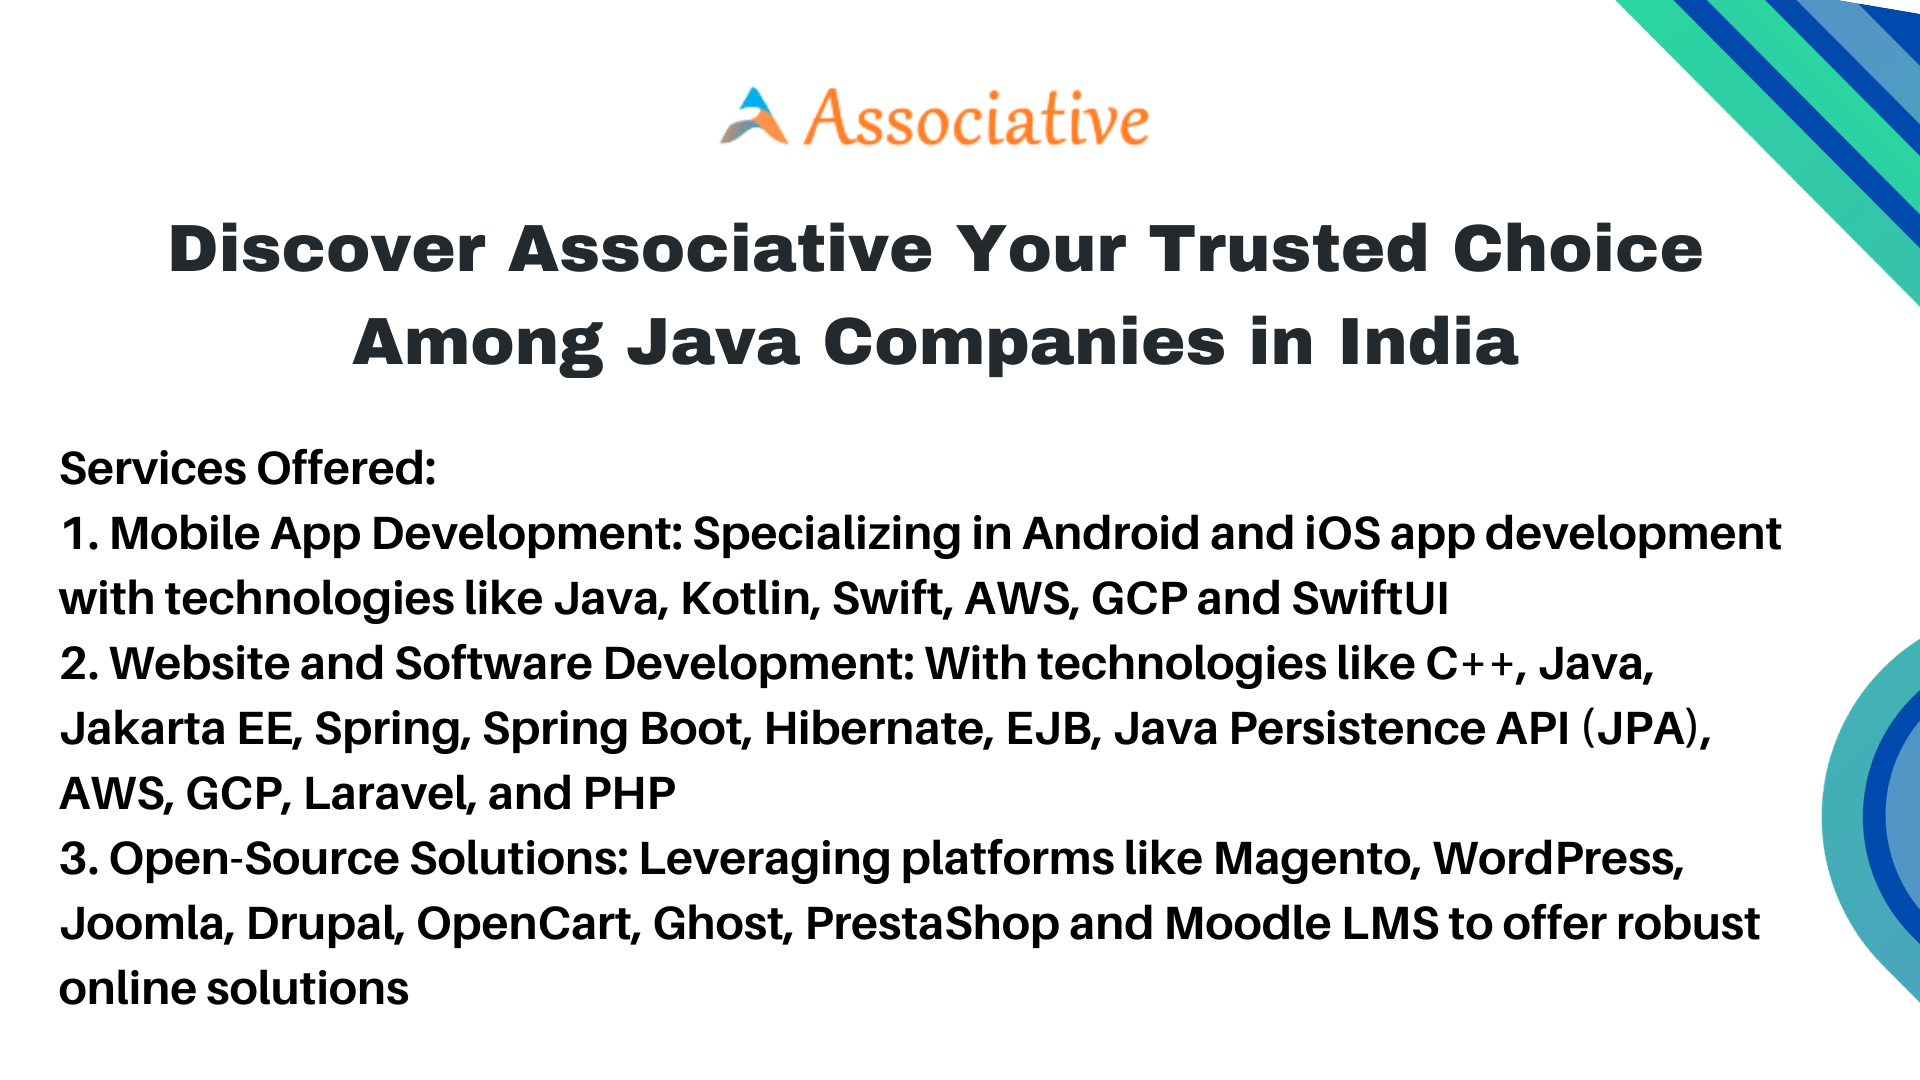 Discover Associative Your Trusted Choice Among Java Companies in India